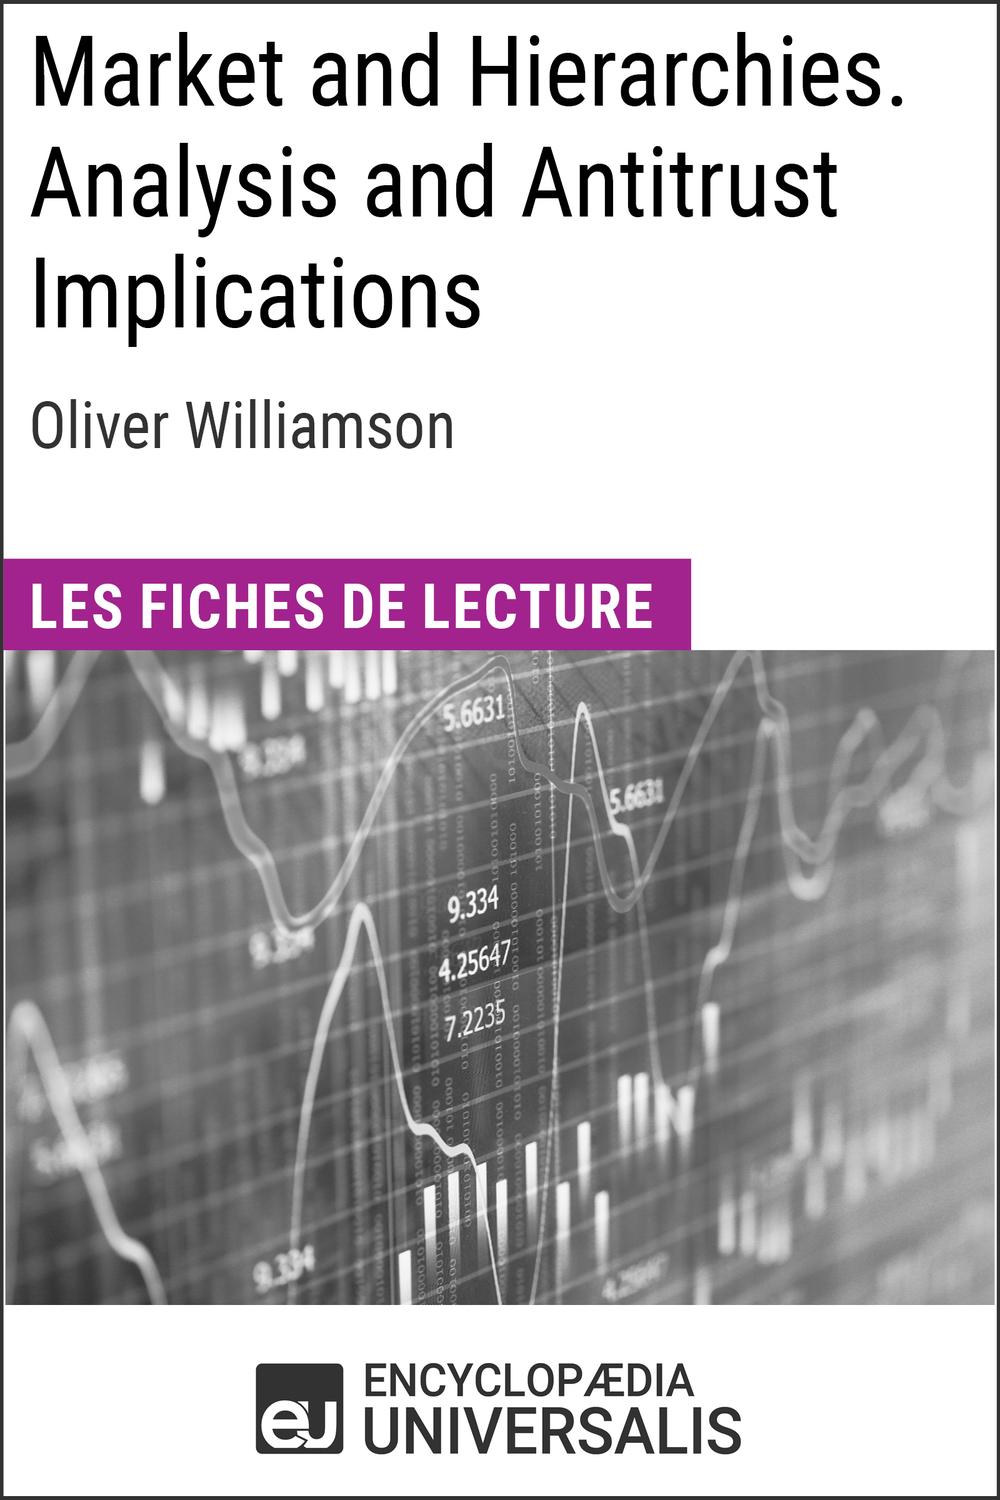 Market and Hierarchies. Analysis and Antitrust Implications d'Oliver Williamson - Encyclopaedia Universalis,,